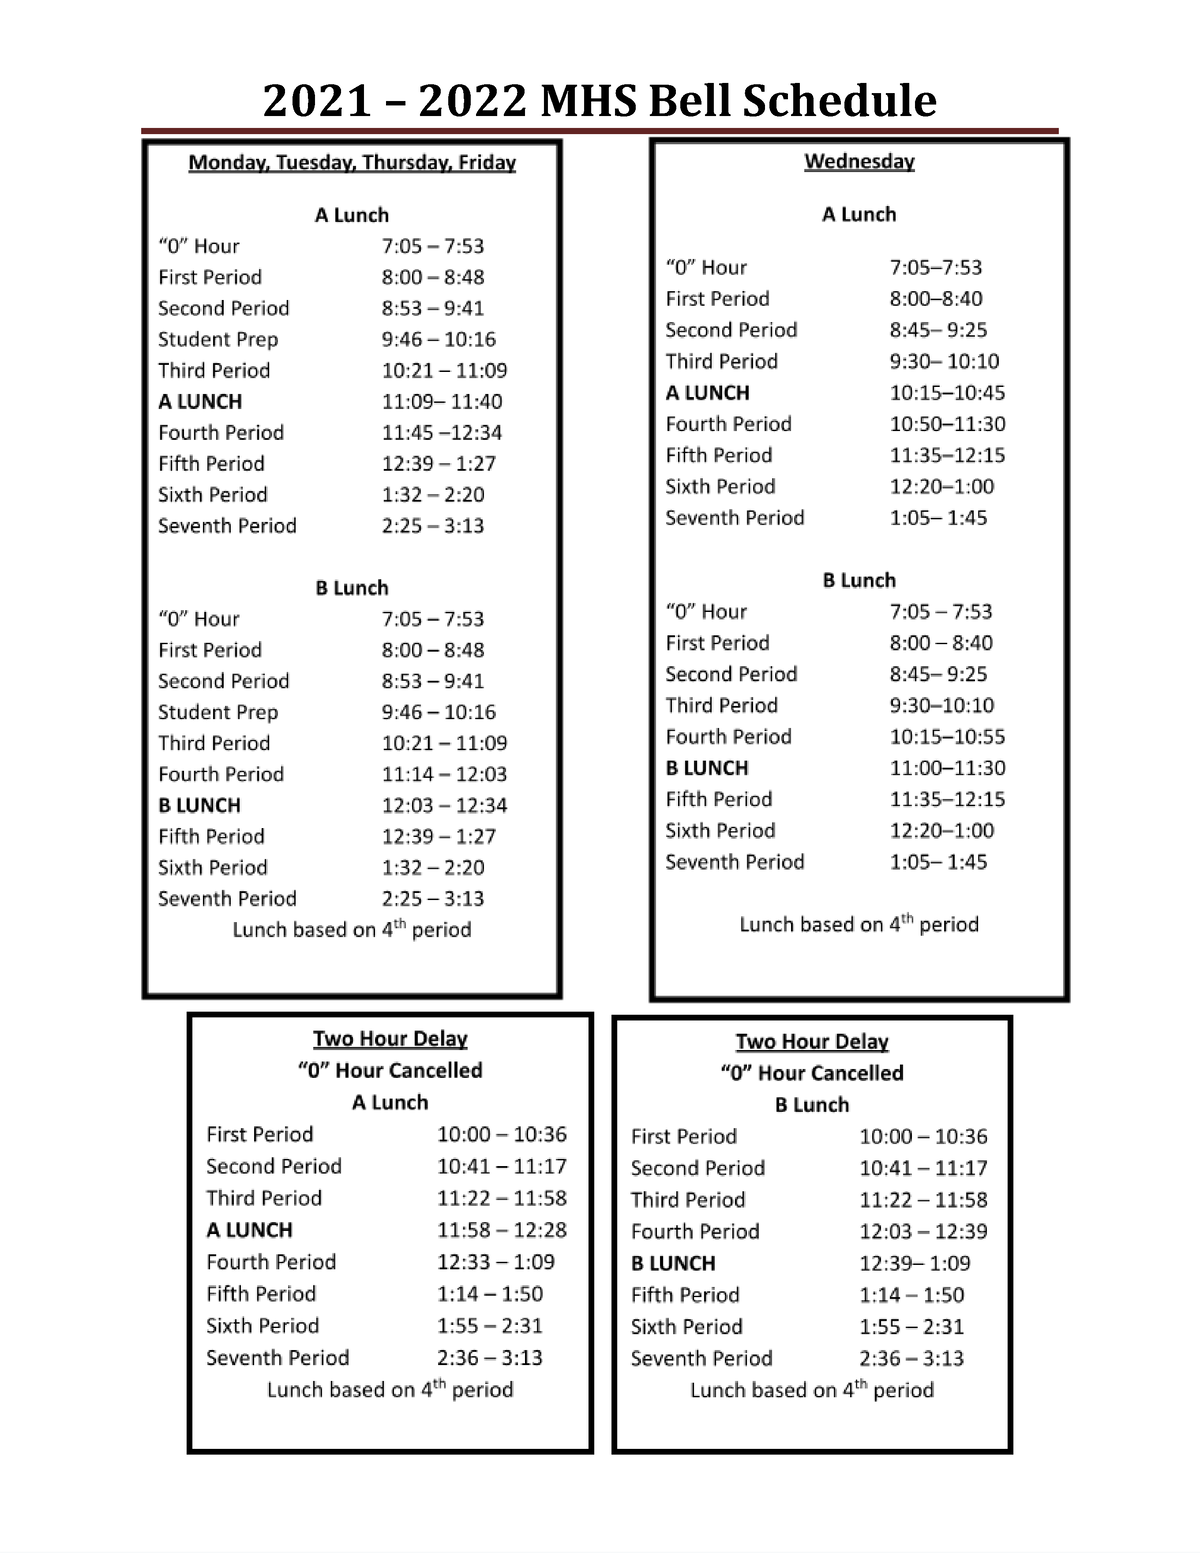 2122 Corrected MHS bell schedule 210382 2021 2022 MHS Bell